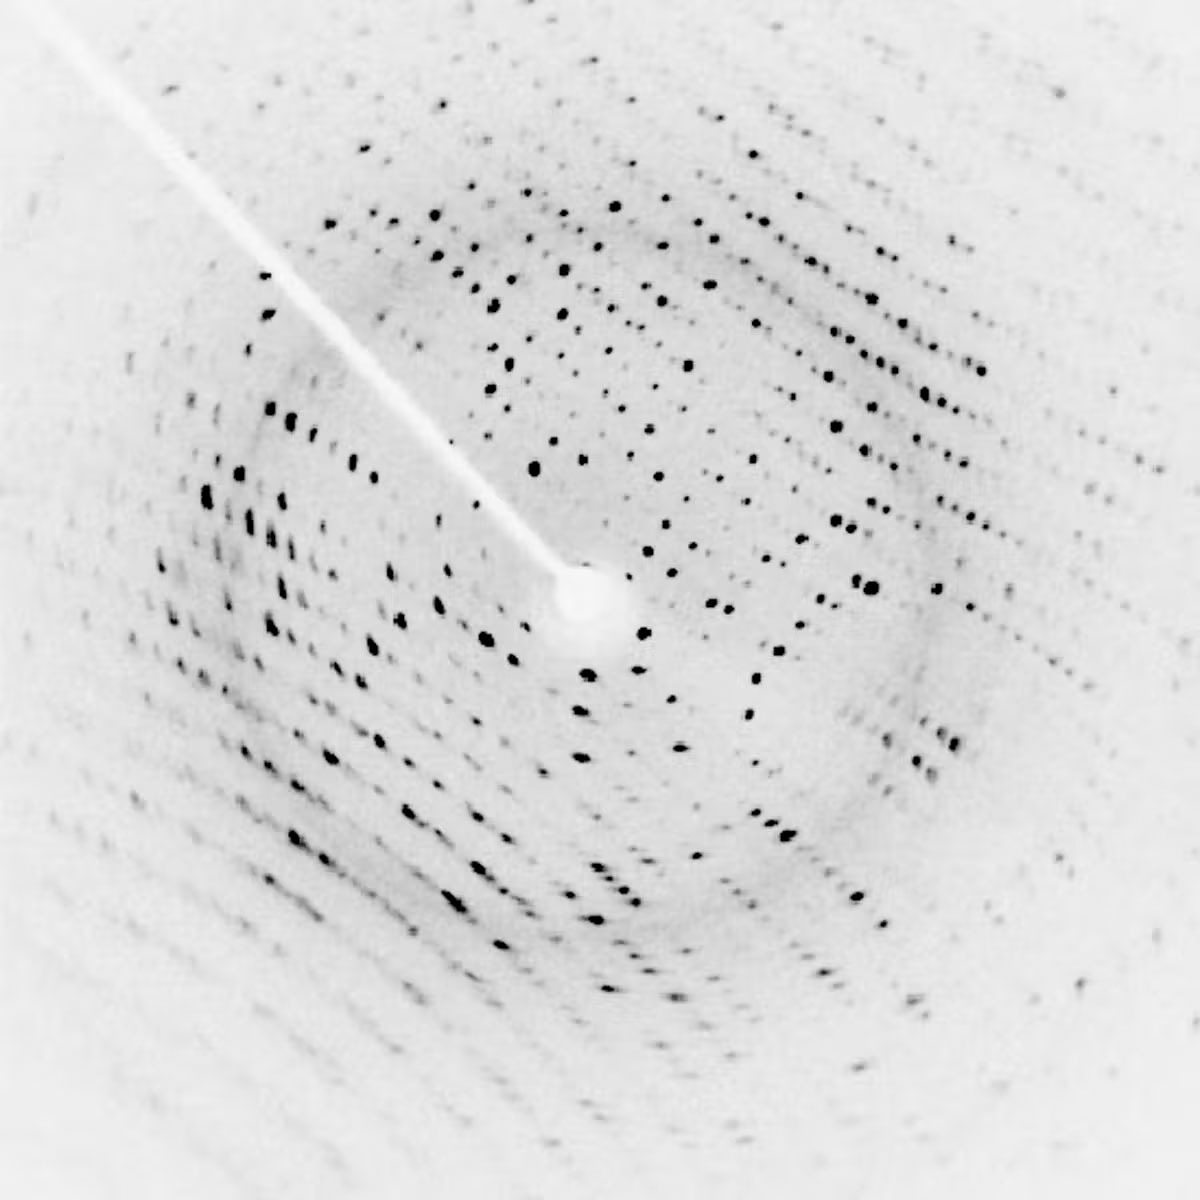 A scattering of black dots on a white background